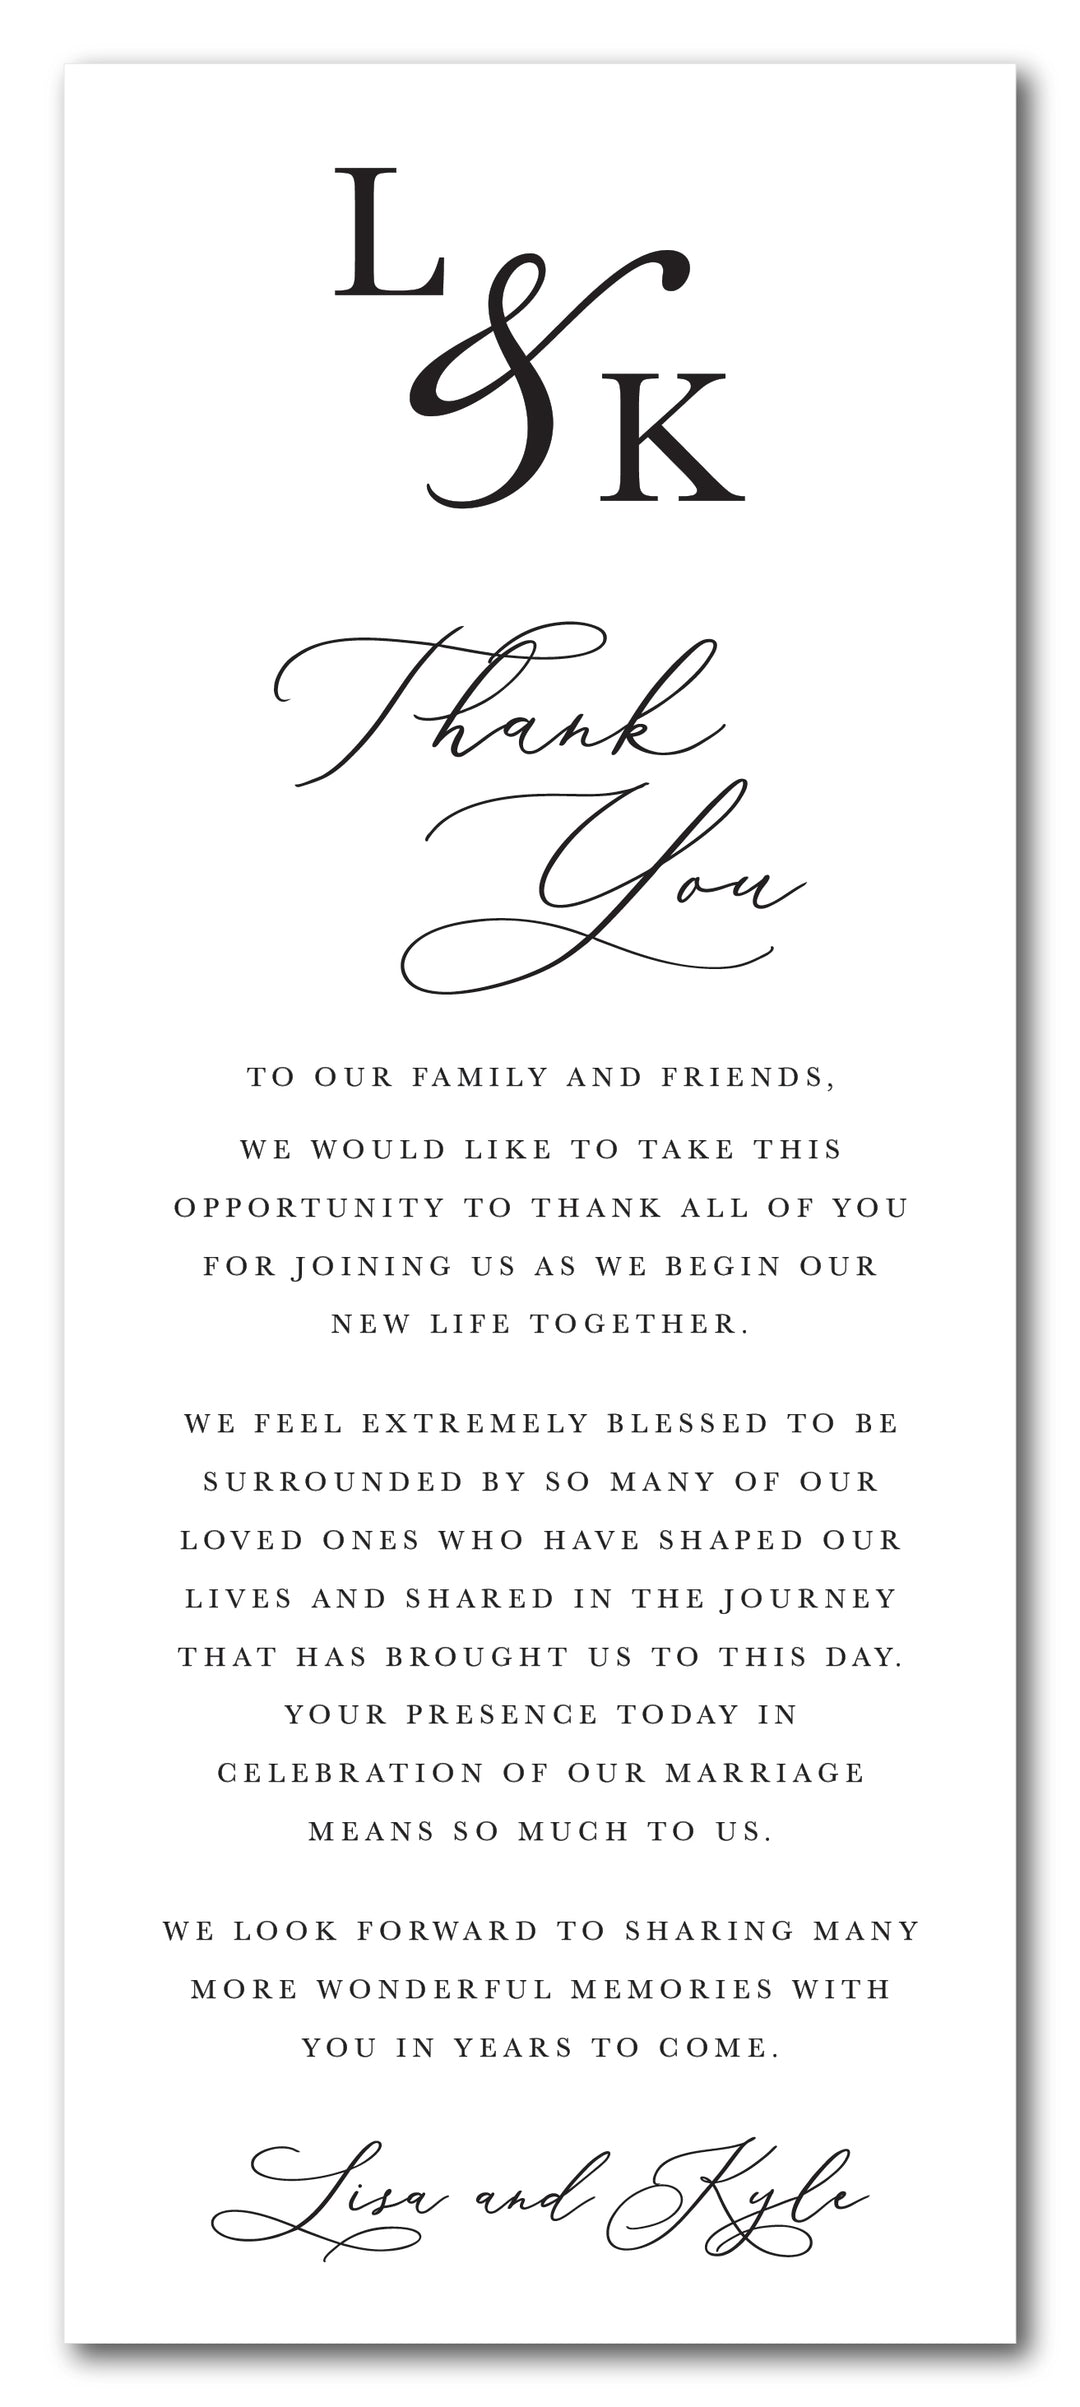 The Lisa Thank You Place Setting Card